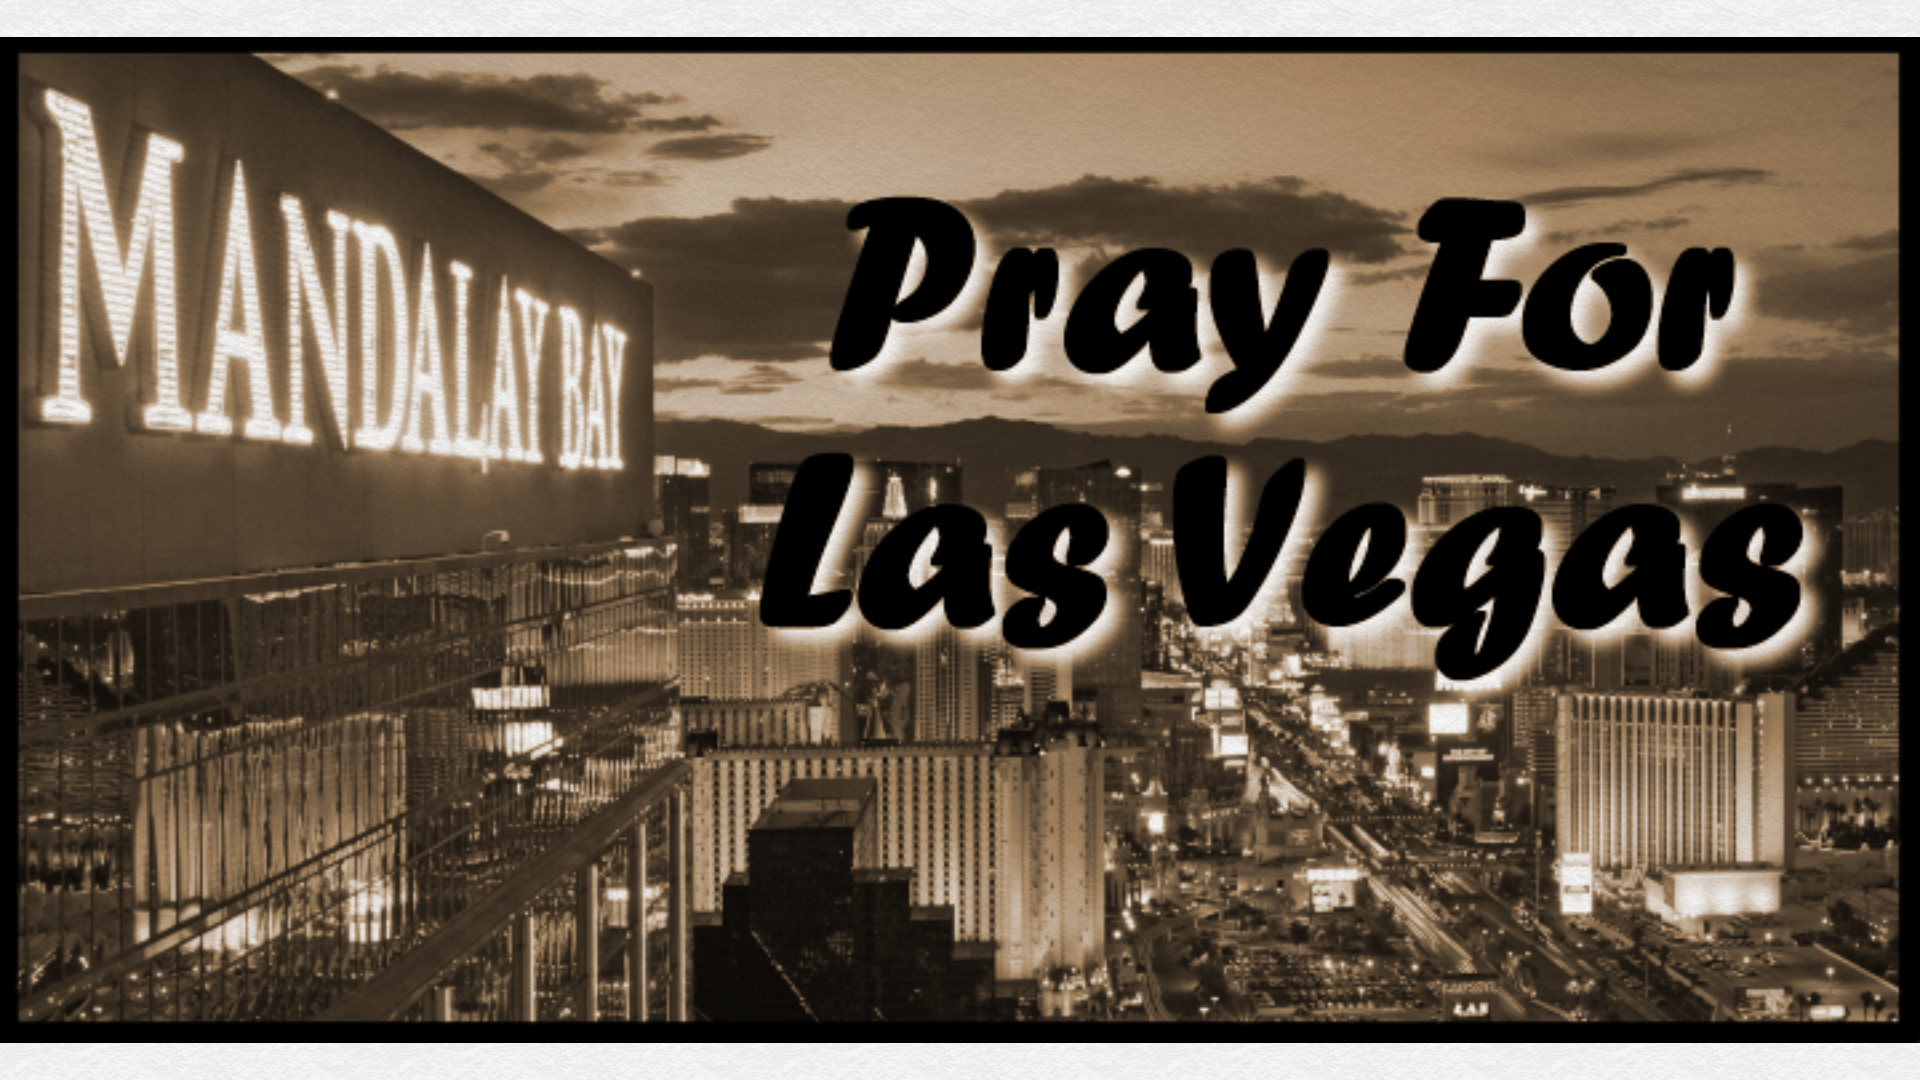 Join us in a moment of blog silence and pray for Las Vegas…